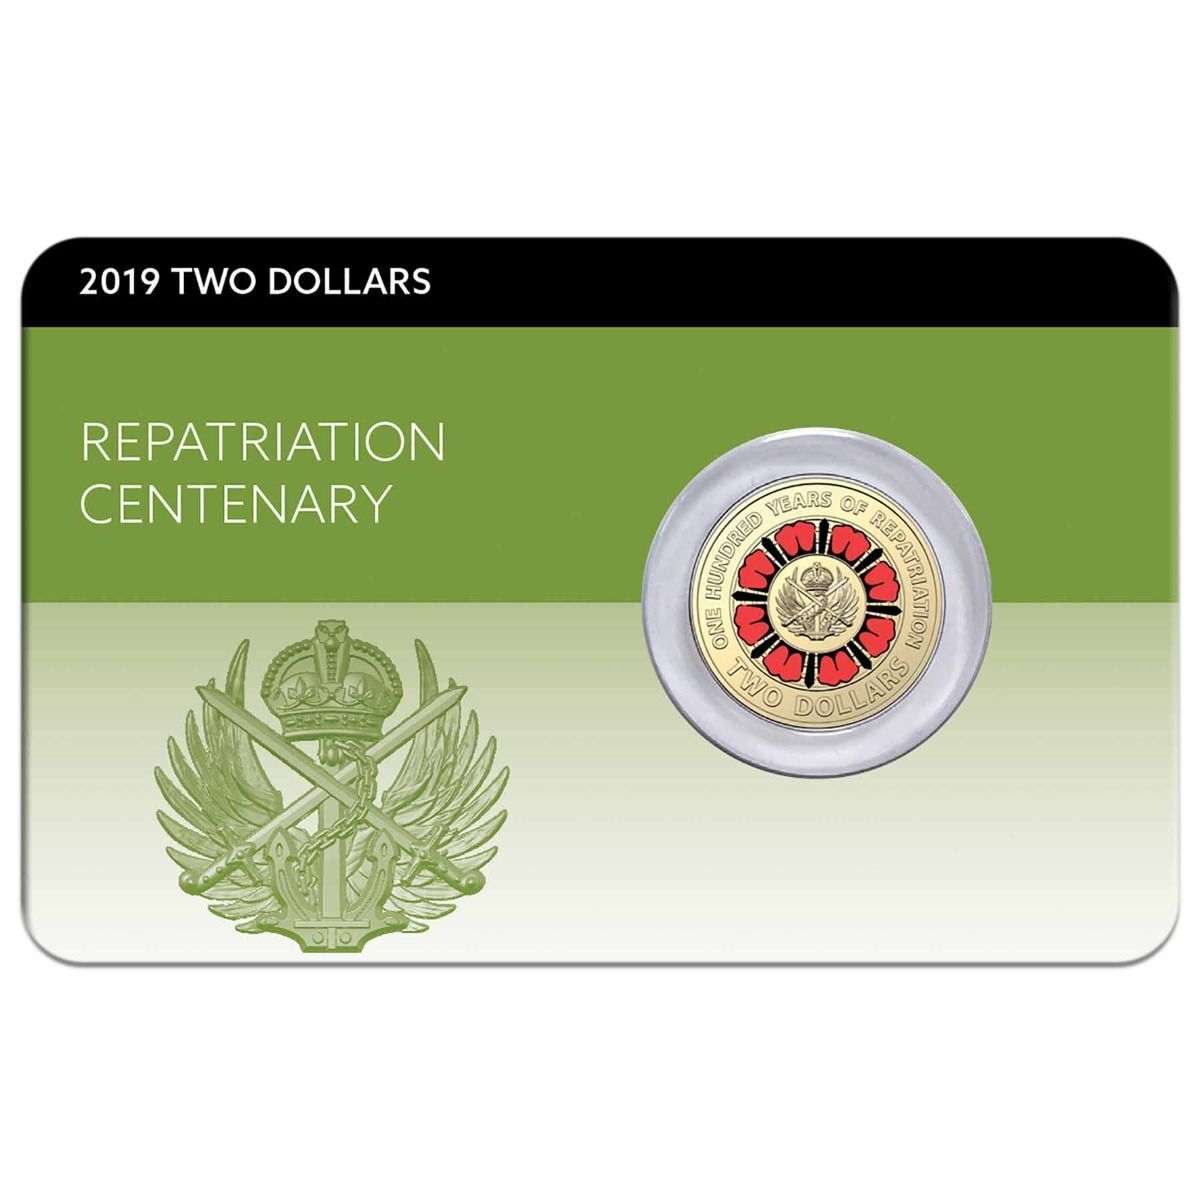 2019 $2 Repatriation Centenery Coin Pack